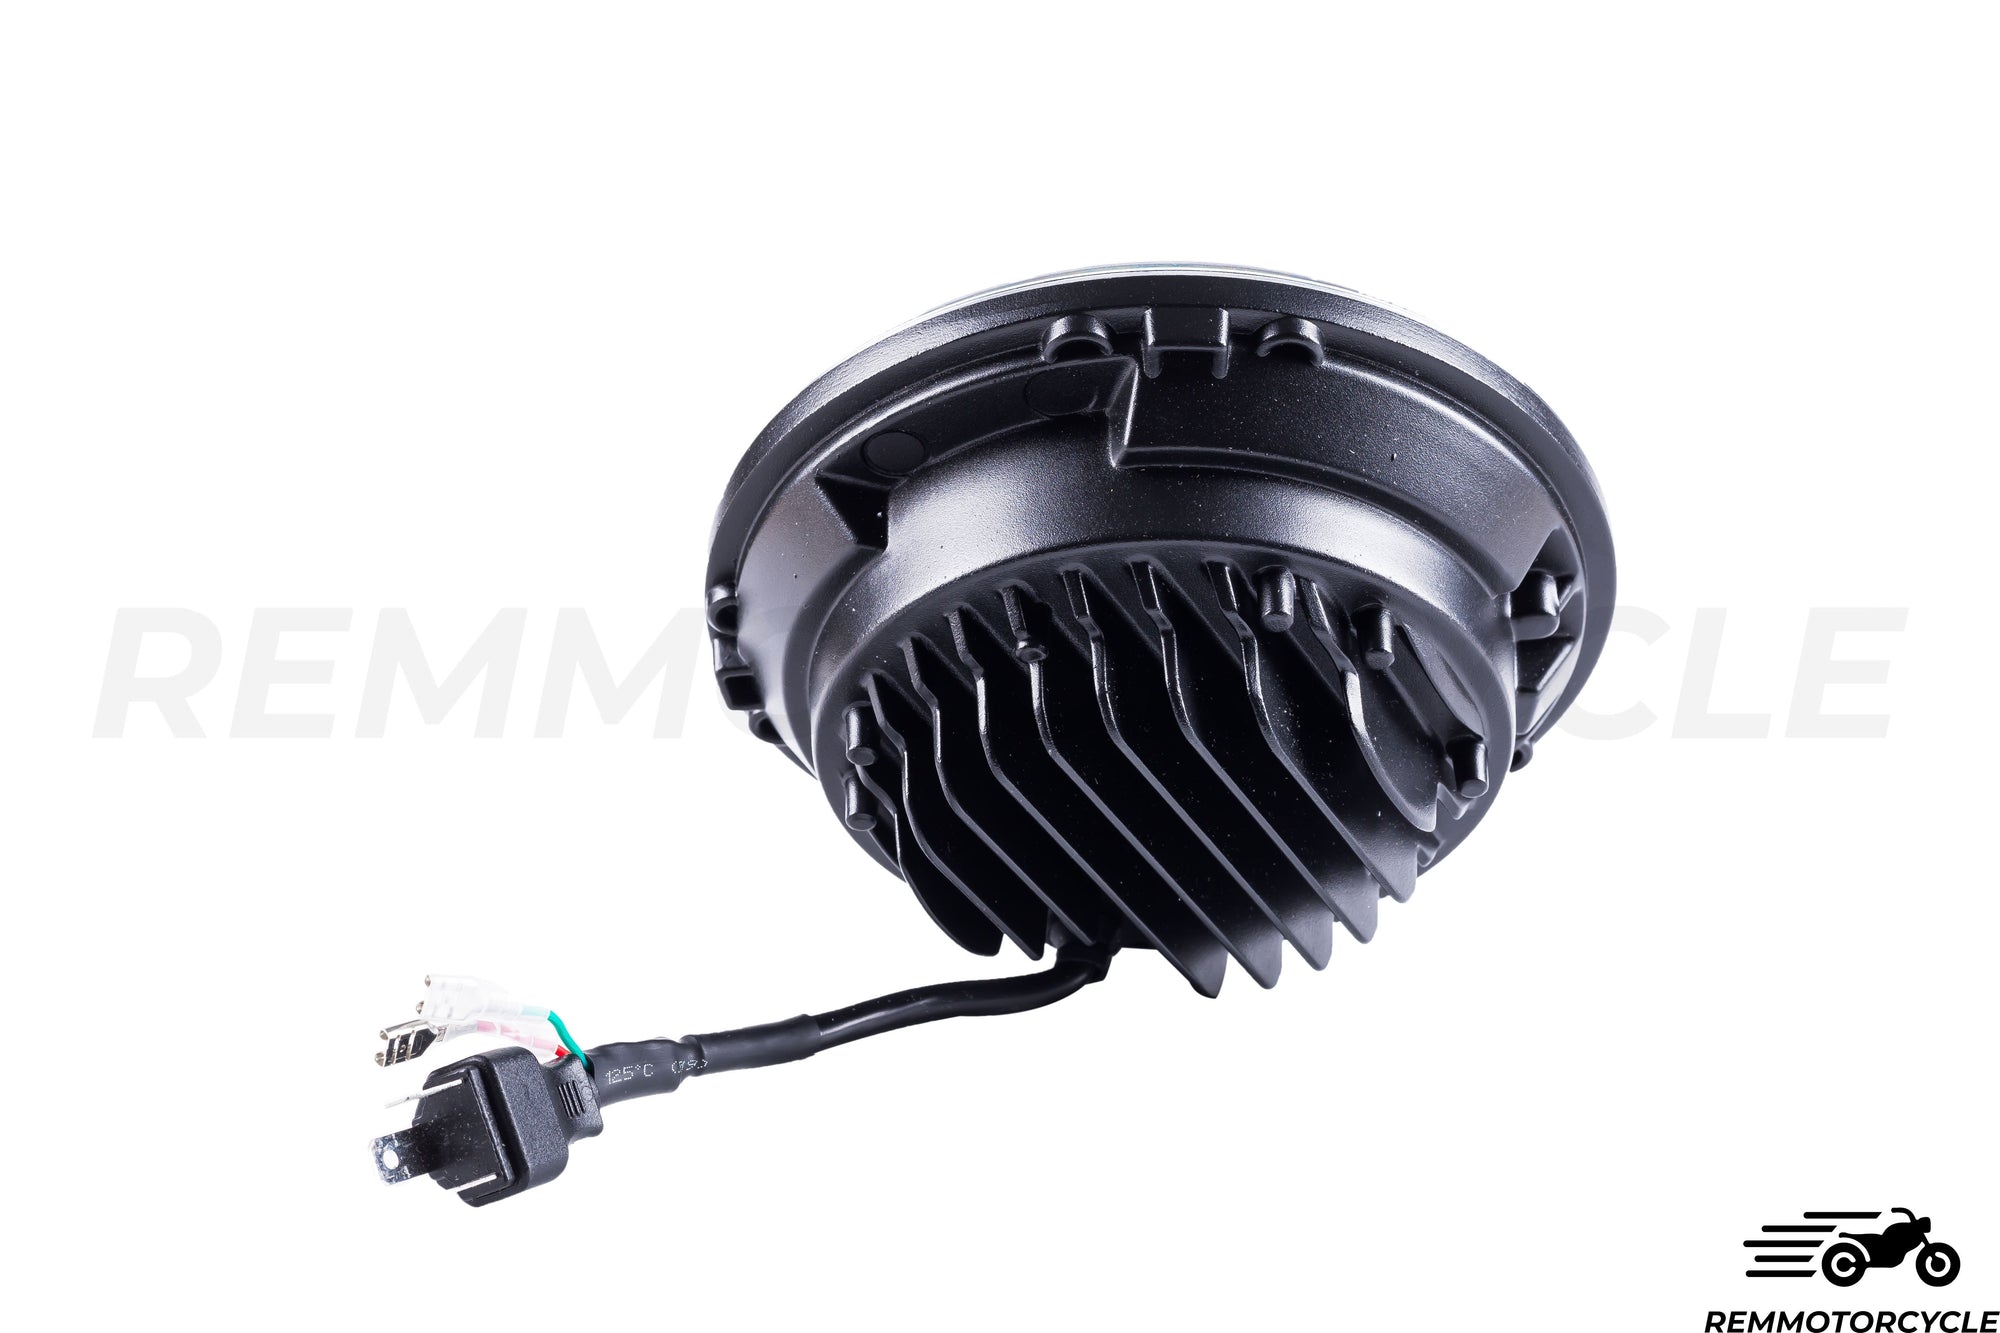 Multi 20 cm Motorcycle LED Headlight with Integrated Turn Signals